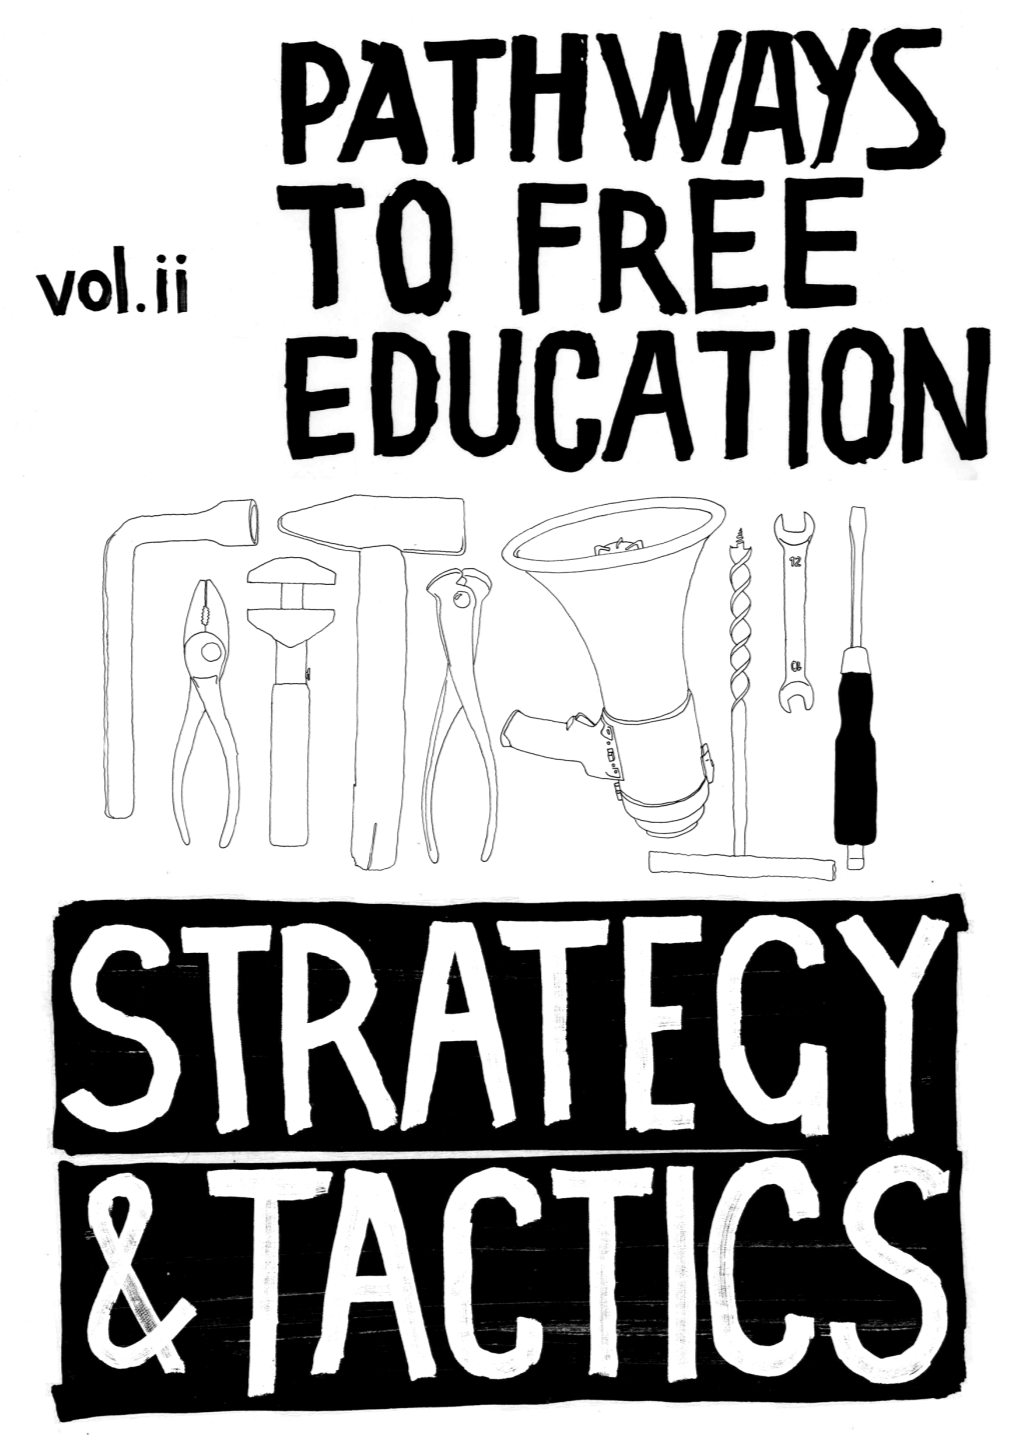 Pathways to Free Education Pamphlet Volume 2